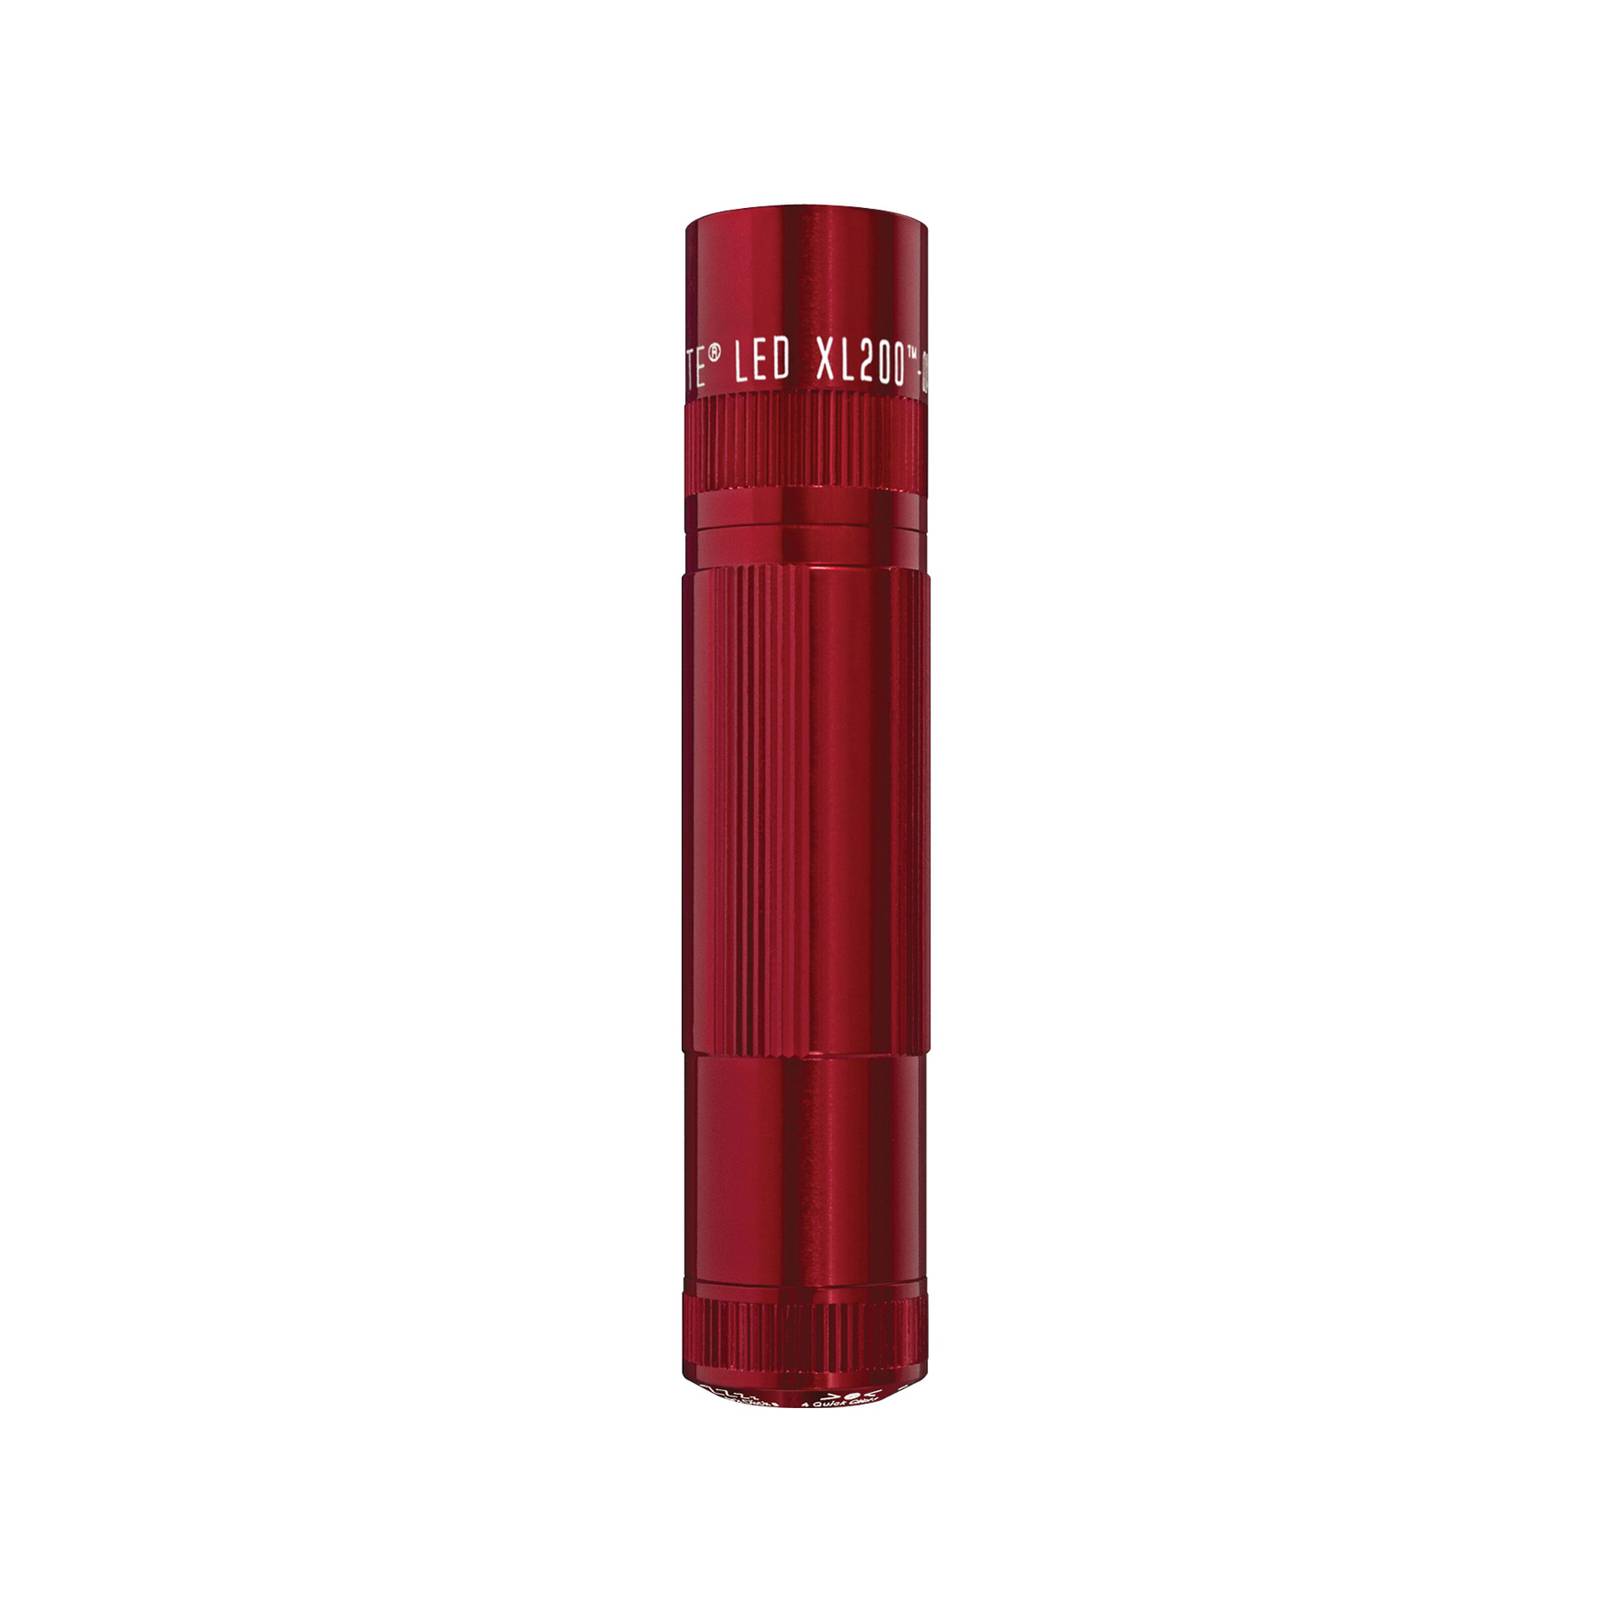 maglite lampe de poche led xl200, 3-cell aaa, rouge